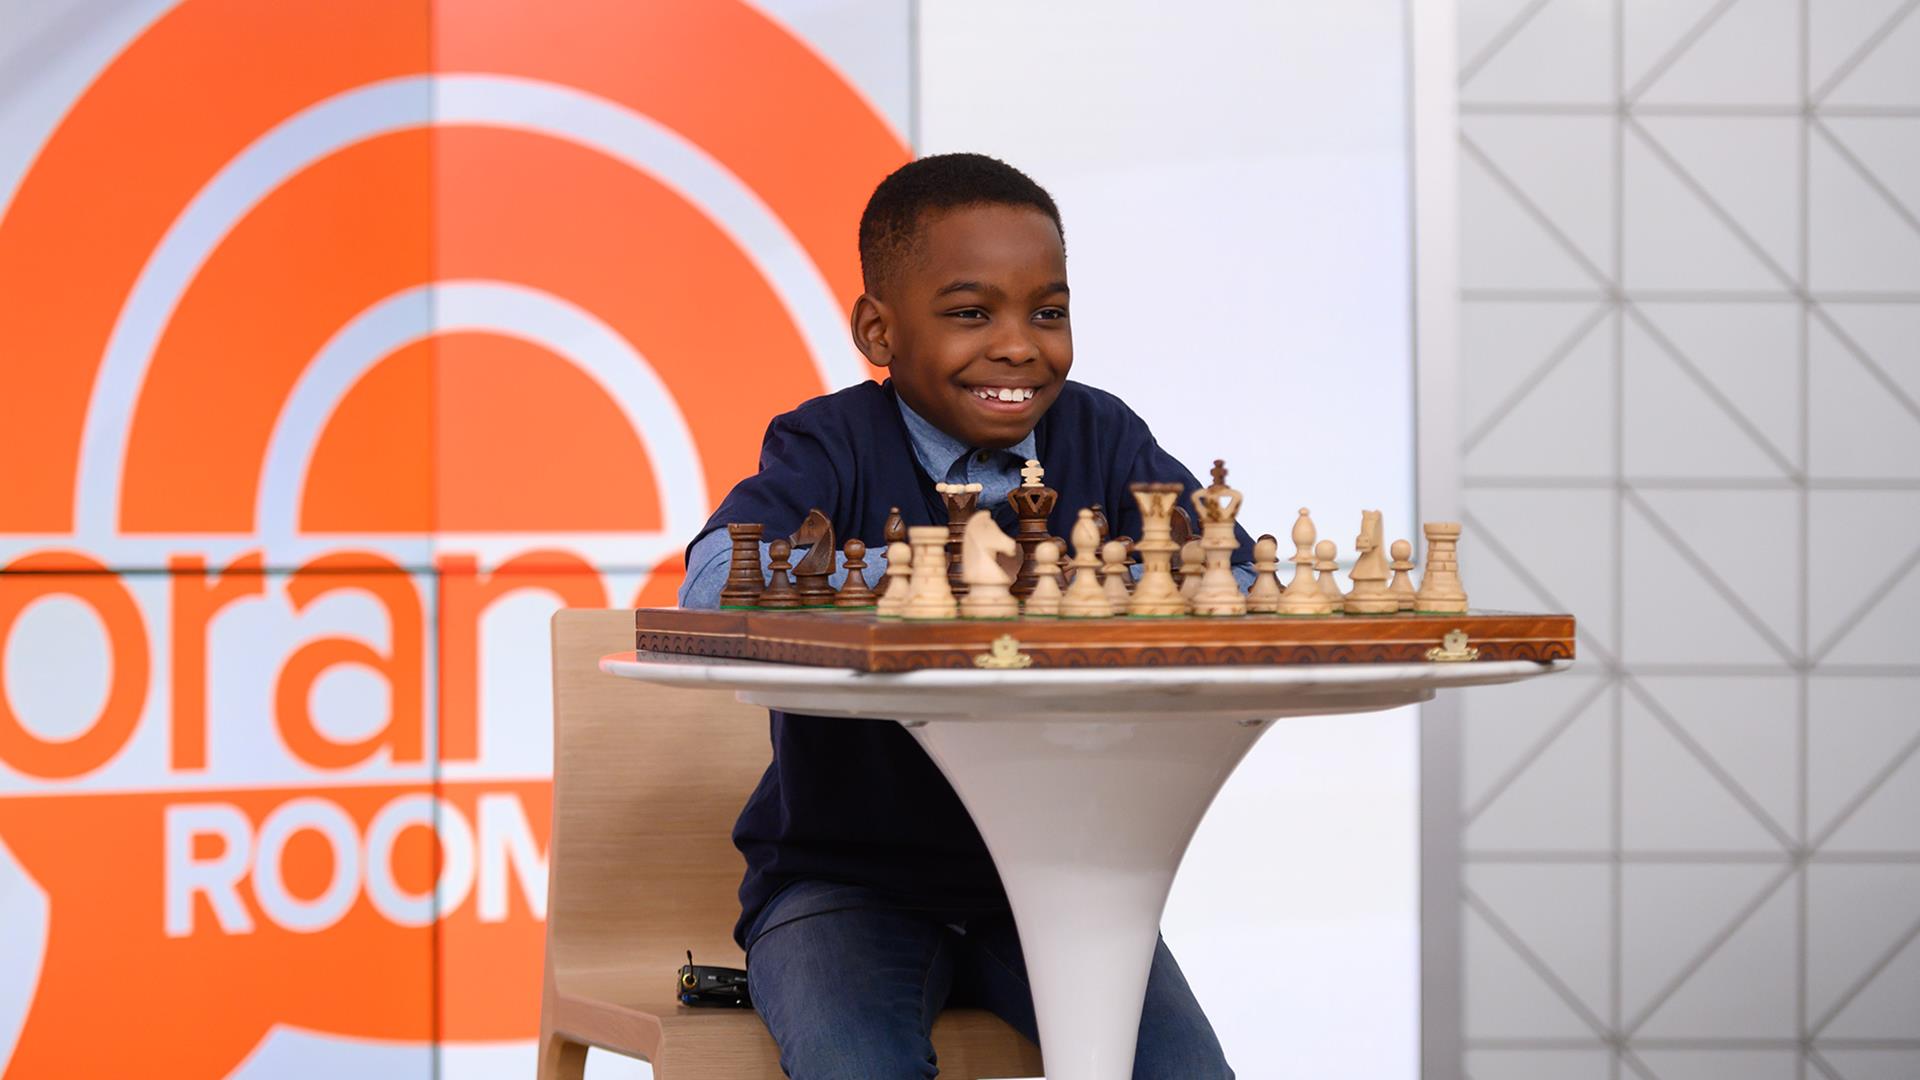 Meet Tani Adewumi, 12-year-old refugee and chess prodigy